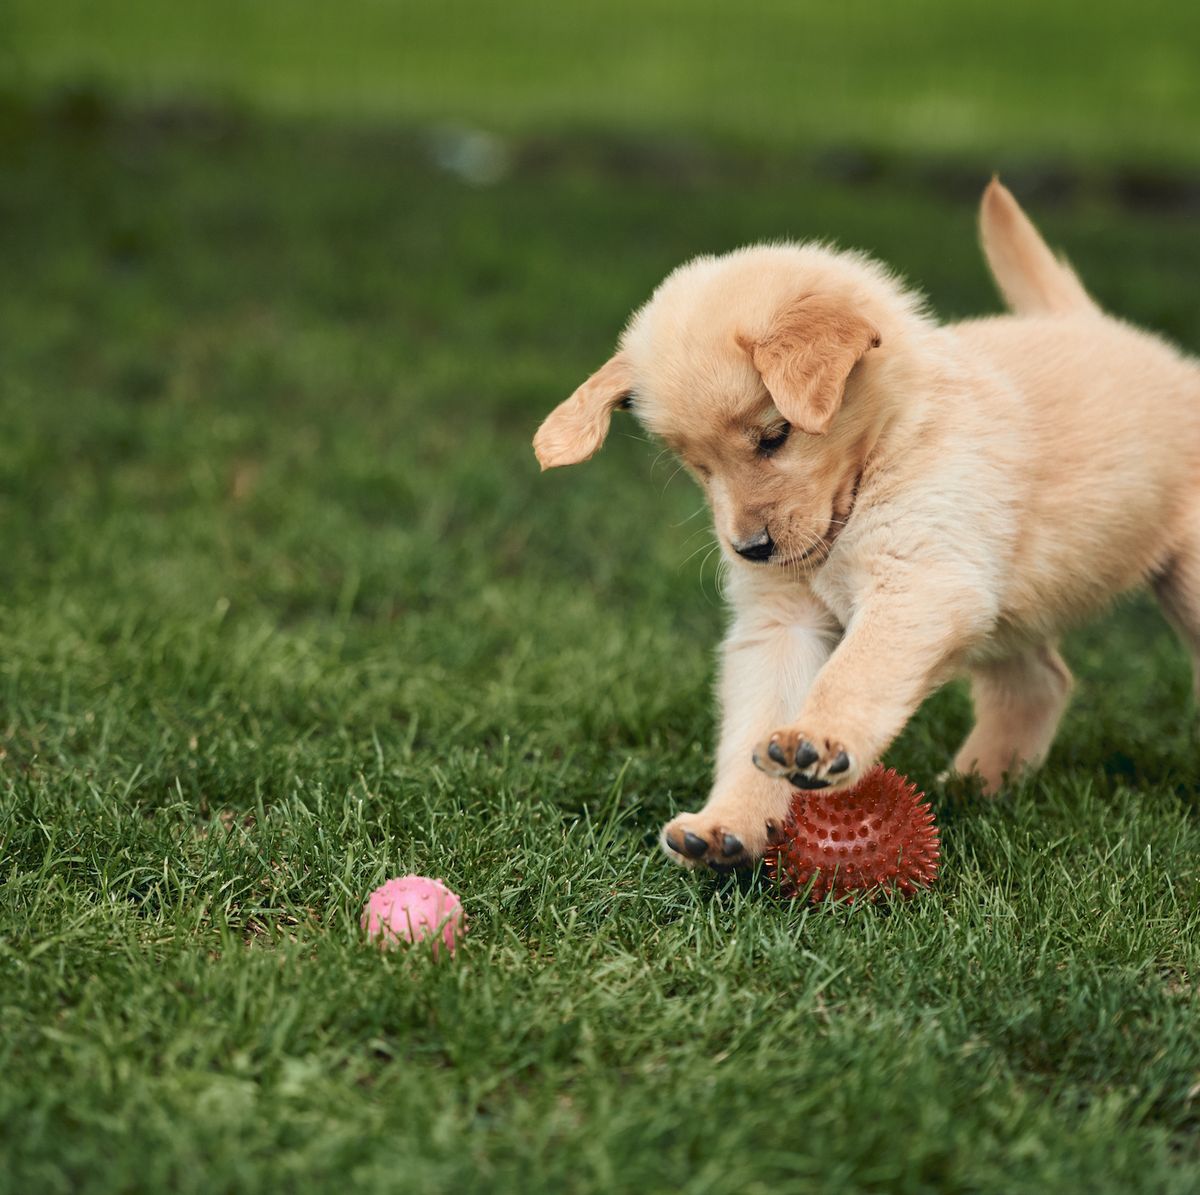 5 Common Puppy Problems and How to Solve Them